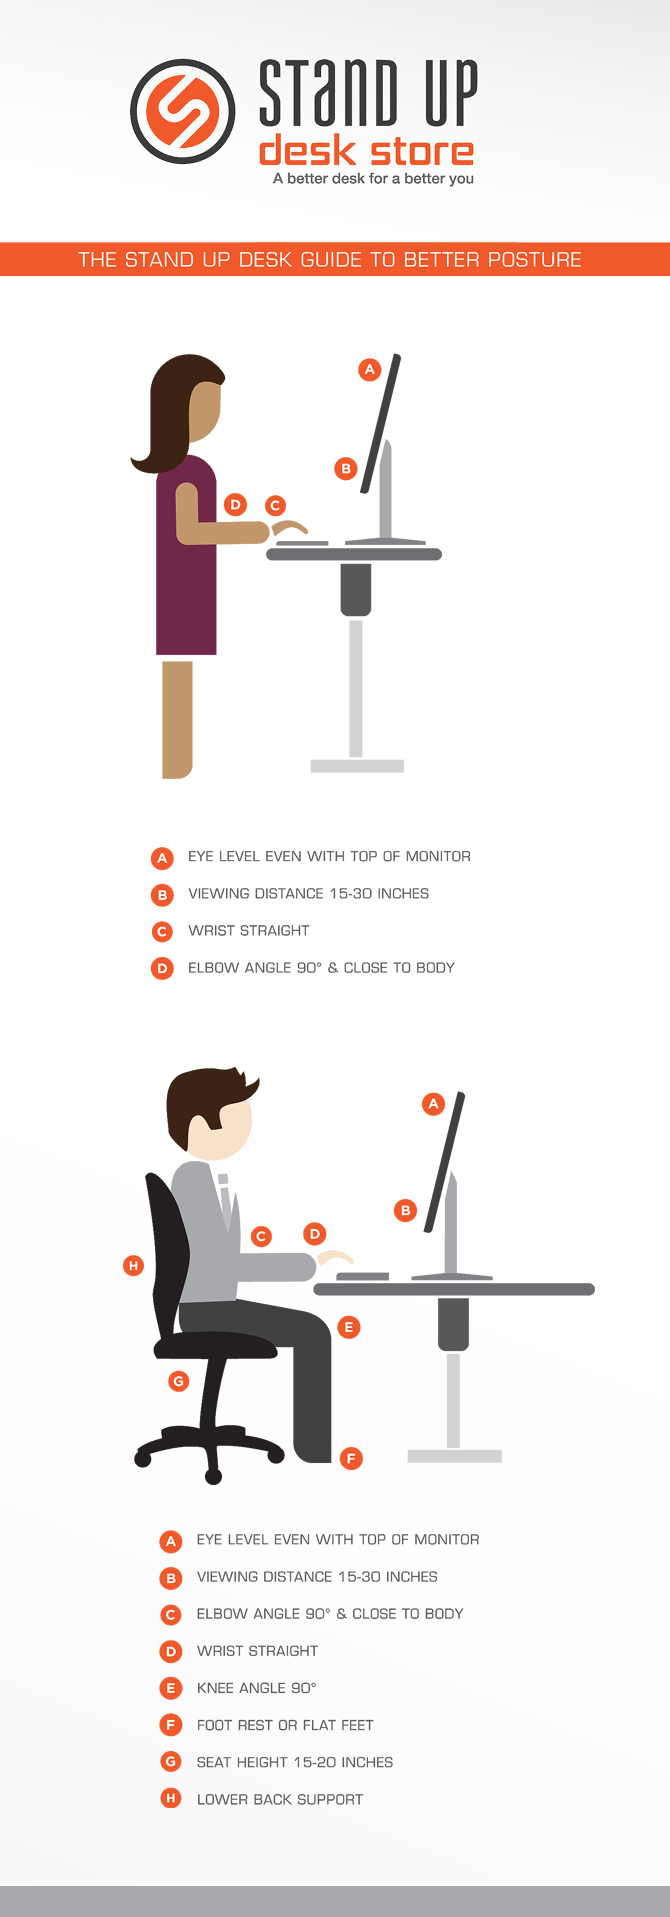 The benefits of using standing desks: latest research